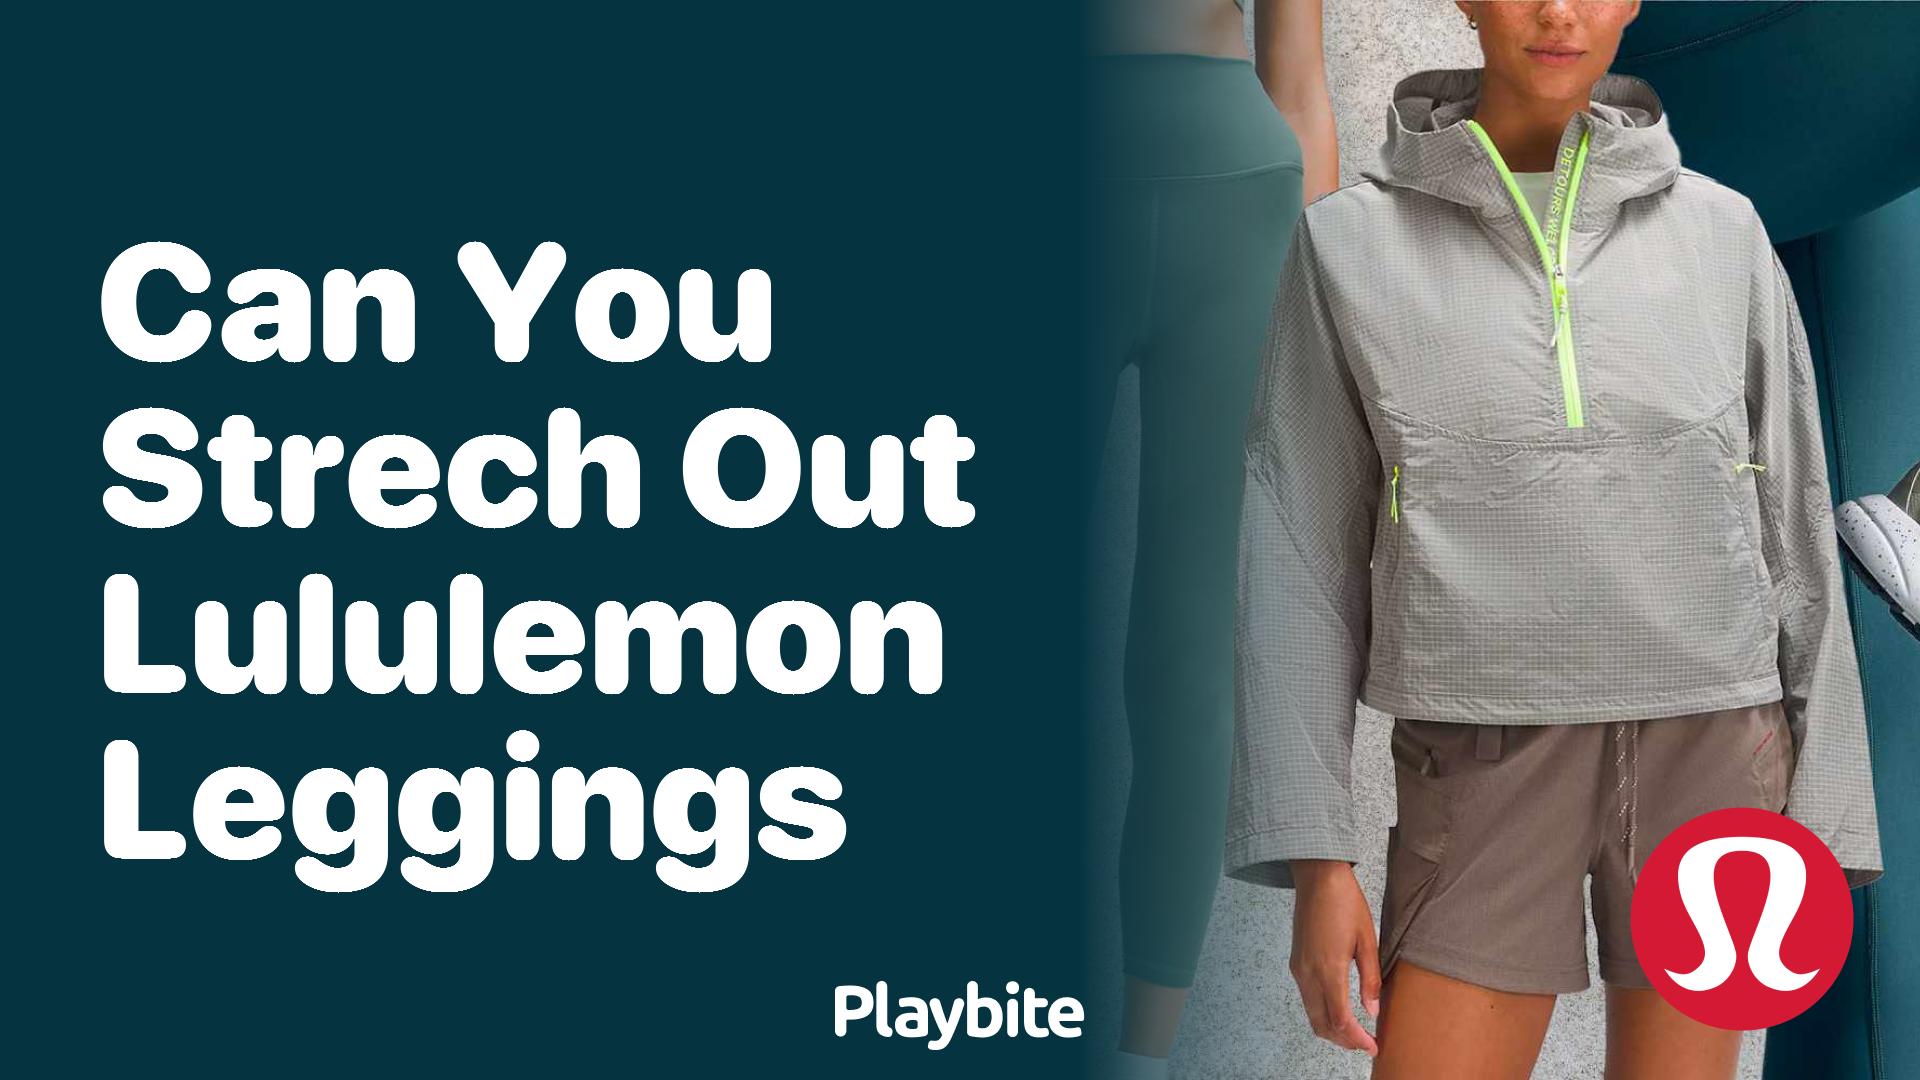 Can You Stretch Out Lululemon Leggings? - Playbite